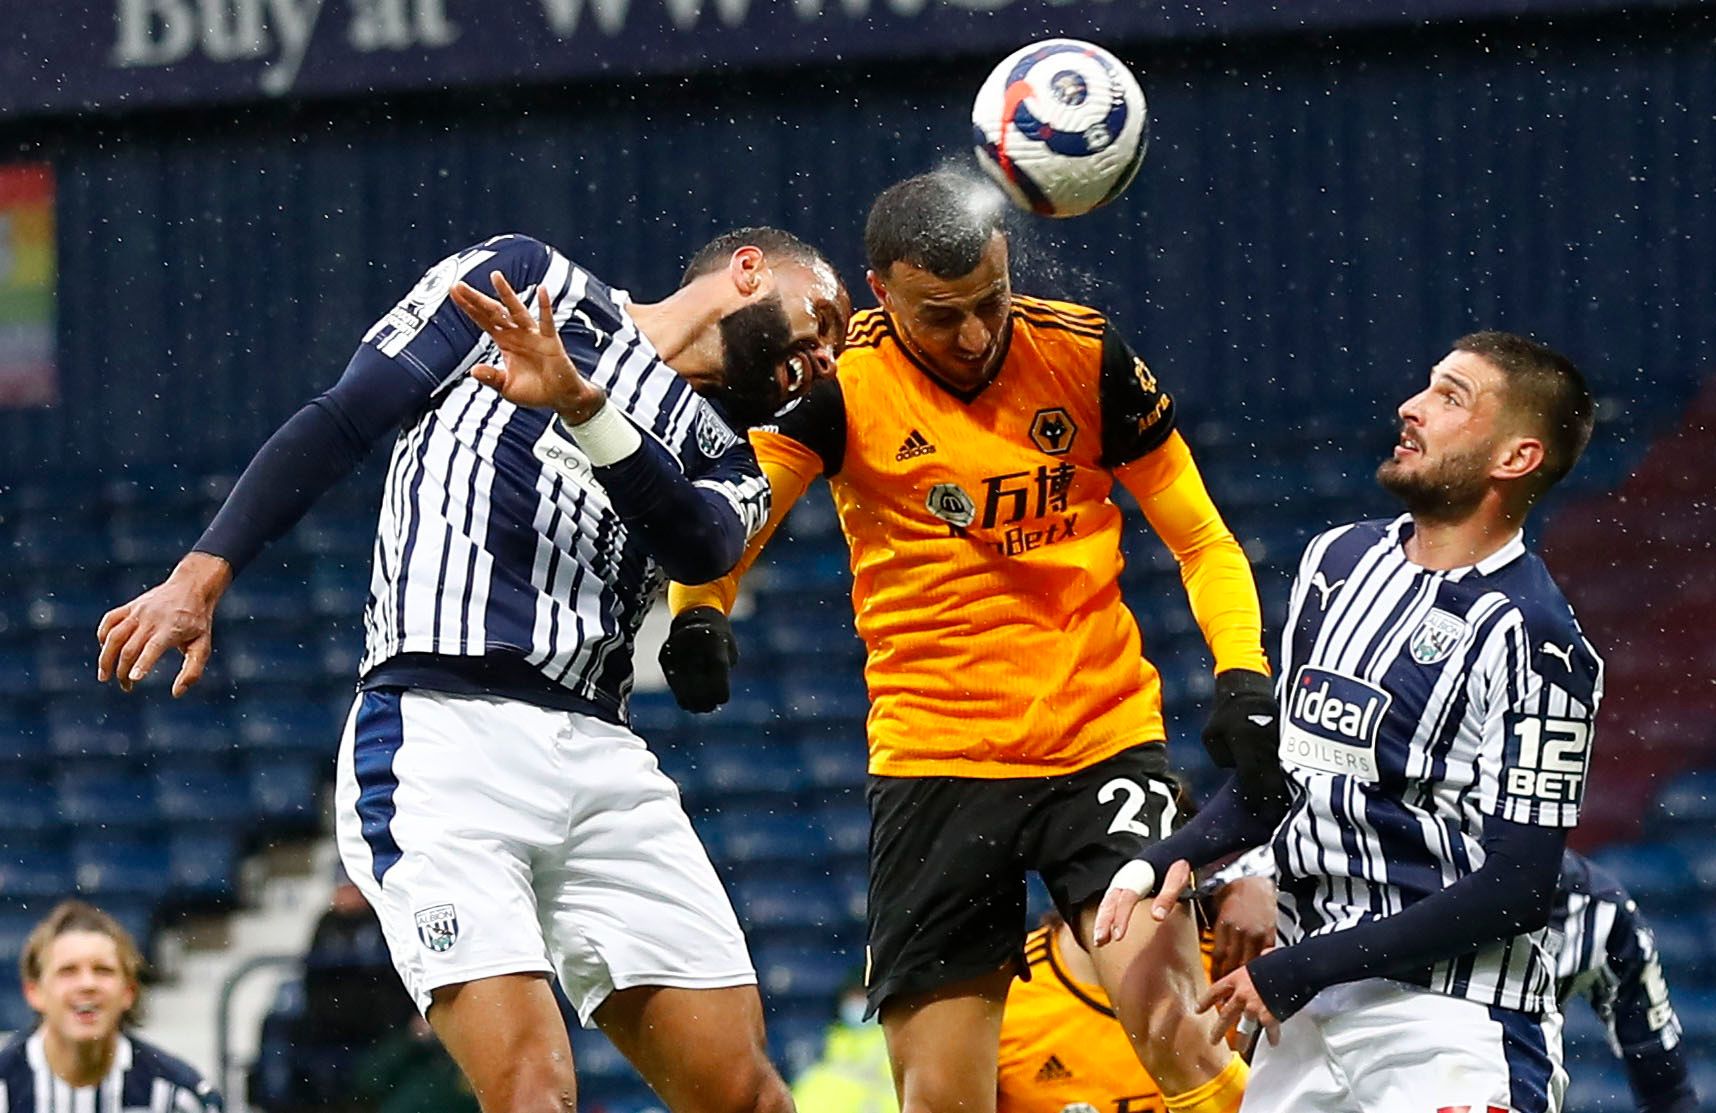 Soccer Football - Premier League - West Bromwich Albion v Wolverhampton Wanderers - The Hawthorns, West Bromwich, Britain - May 3, 2021 Wolverhampton Wanderers' Romain Saiss heads at goal Pool via REUTERS/Jason Cairnduff EDITORIAL USE ONLY. No use with unauthorized audio, video, data, fixture lists, club/league logos or 'live' services. Online in-match use limited to 75 images, no video emulation. No use in betting, games or single club /league/player publications.  Please contact your account r